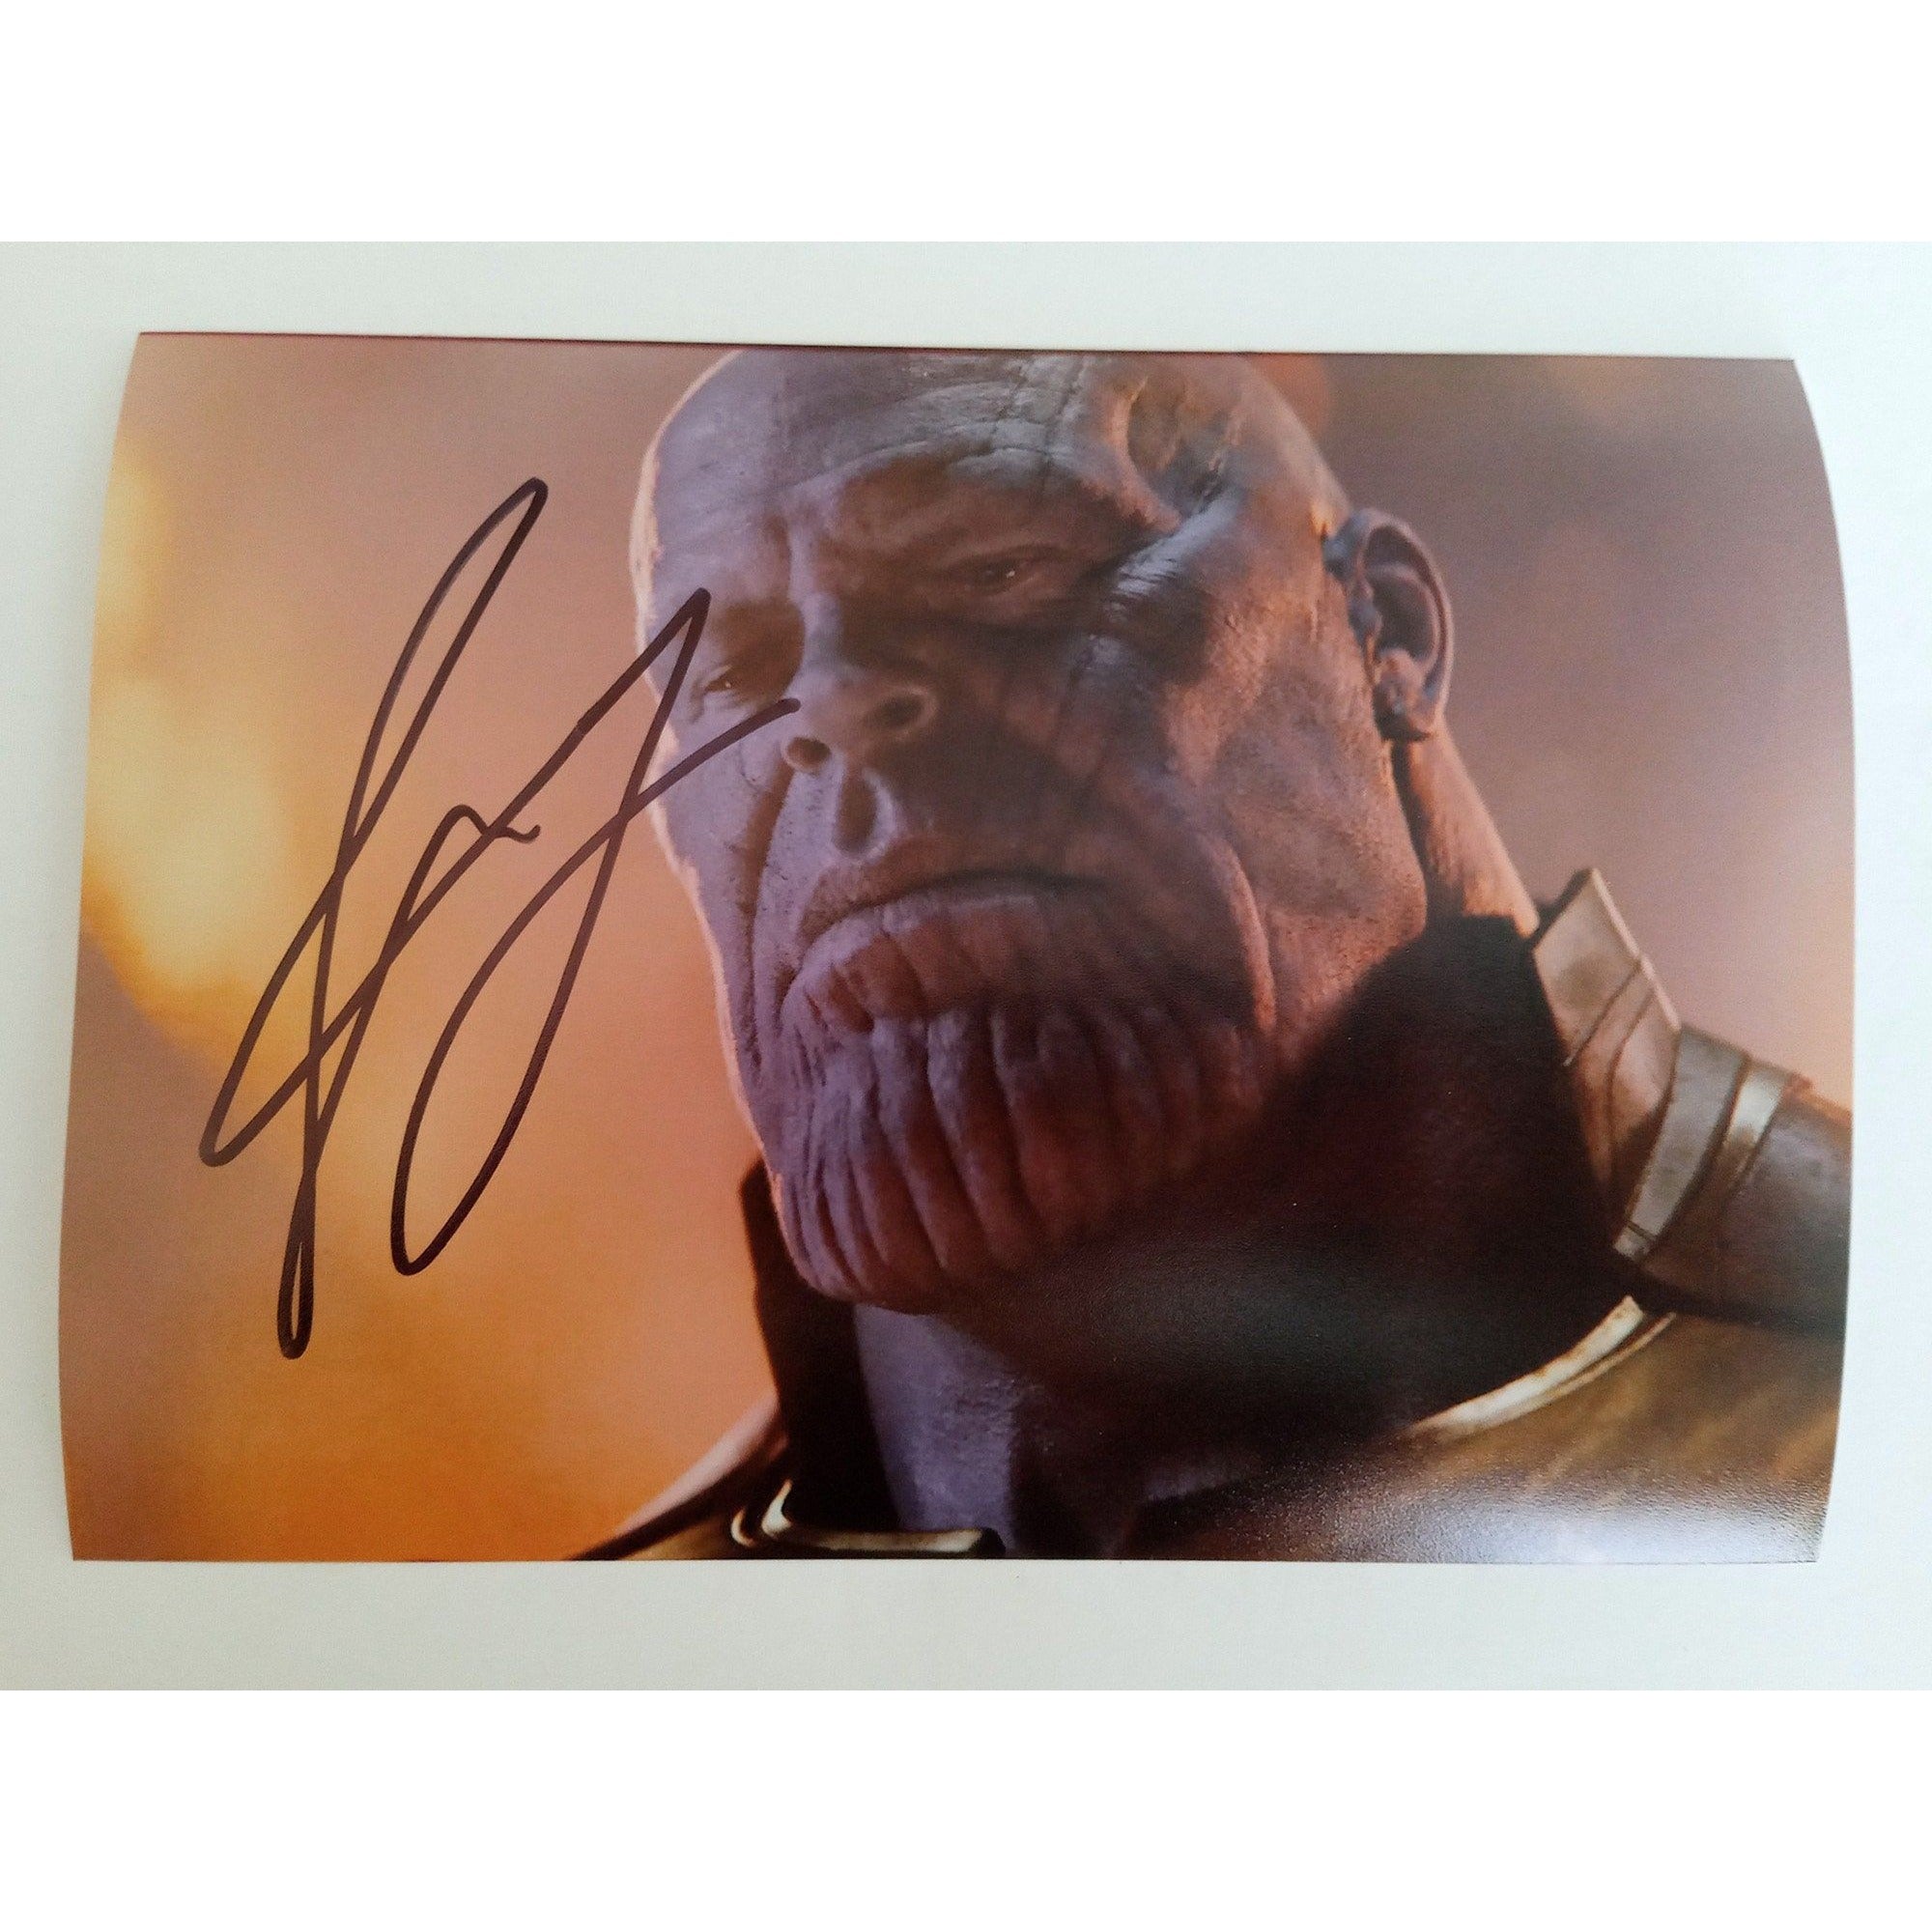 James Brolin Thanos Avengers Endgame 5 x 7 photo signed with proof